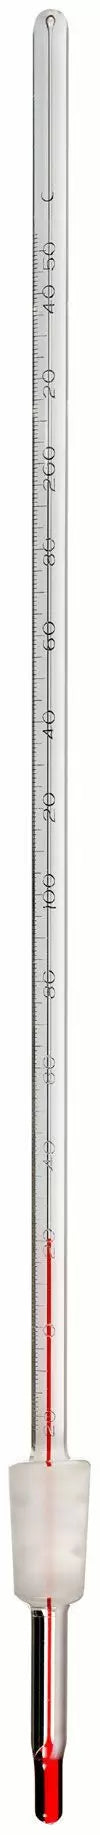 Glass Thermometer With 14/20 Joint